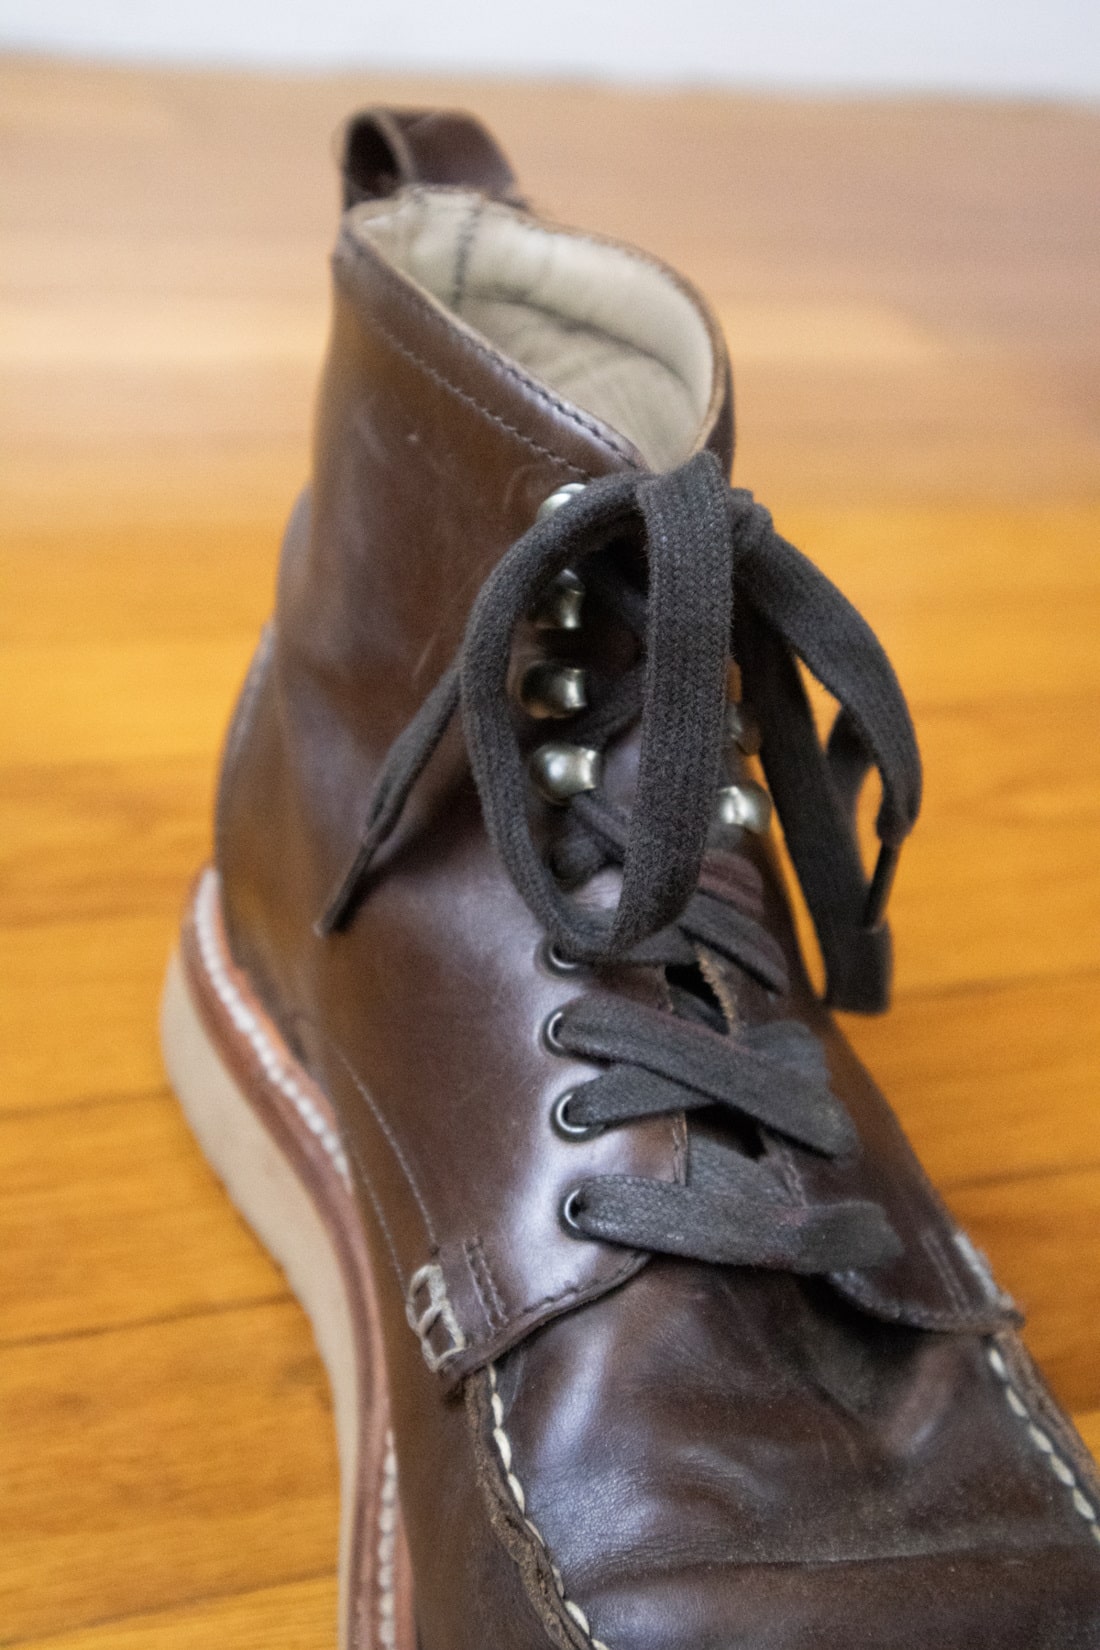 The Lacing Guide: 4 Ways to Lace Your Boots – Blue Owl Workshop